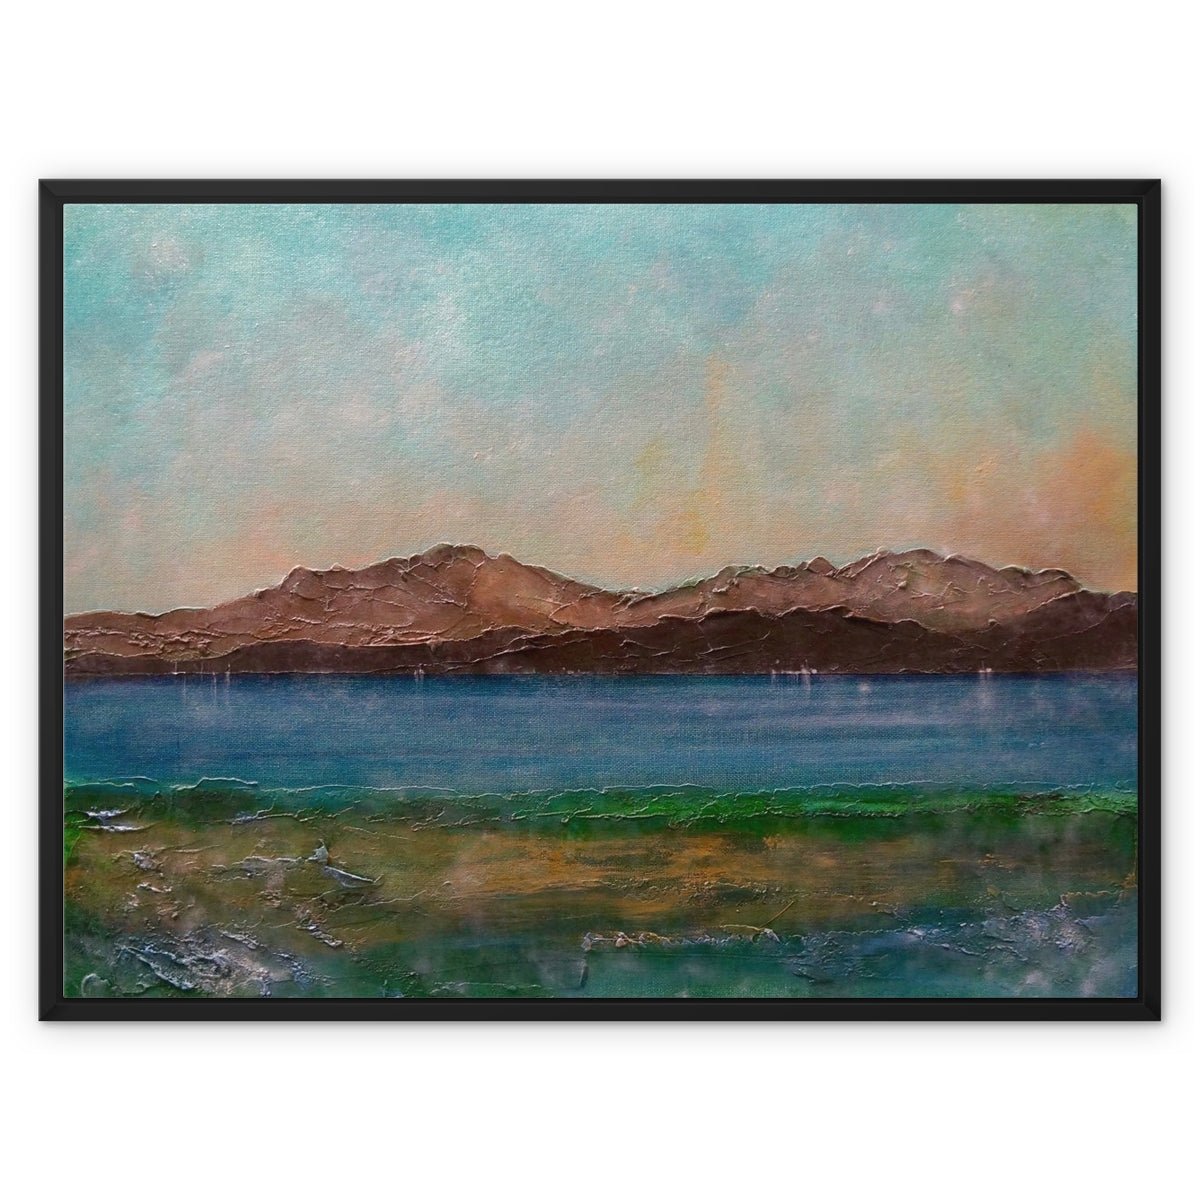 Arran From Scalpsie Bay Painting | Framed Canvas-Floating Framed Canvas Prints-Arran Art Gallery-32"x24"-Black Frame-Paintings, Prints, Homeware, Art Gifts From Scotland By Scottish Artist Kevin Hunter